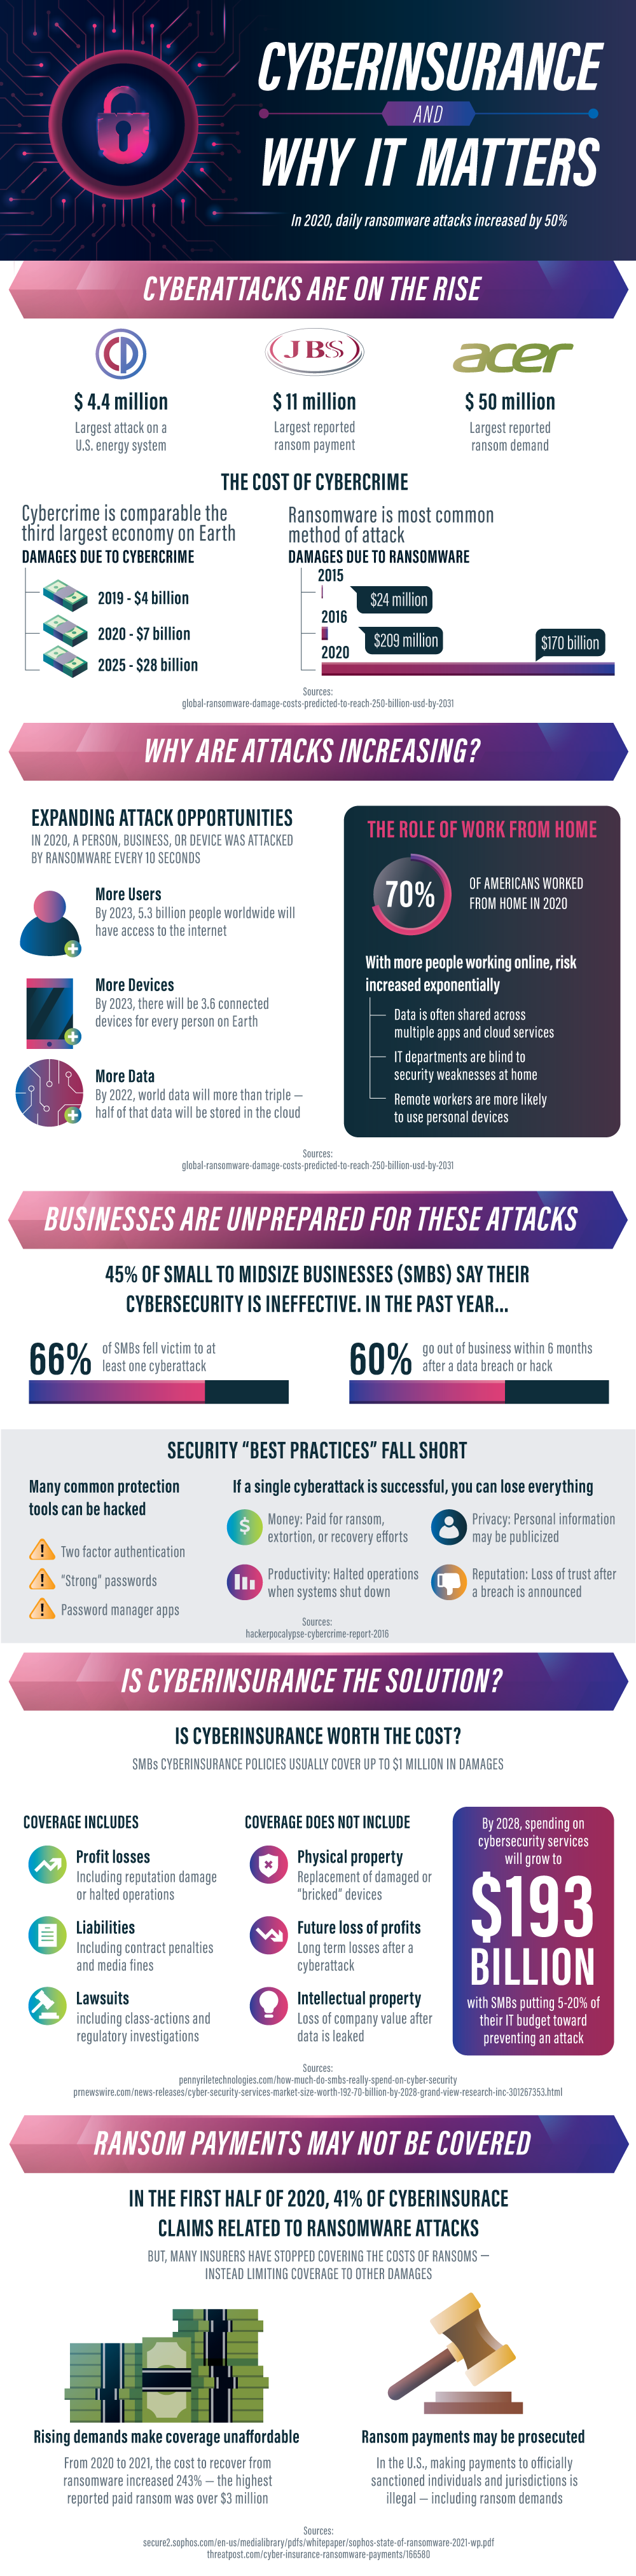 cyber insurance - how it can help your business